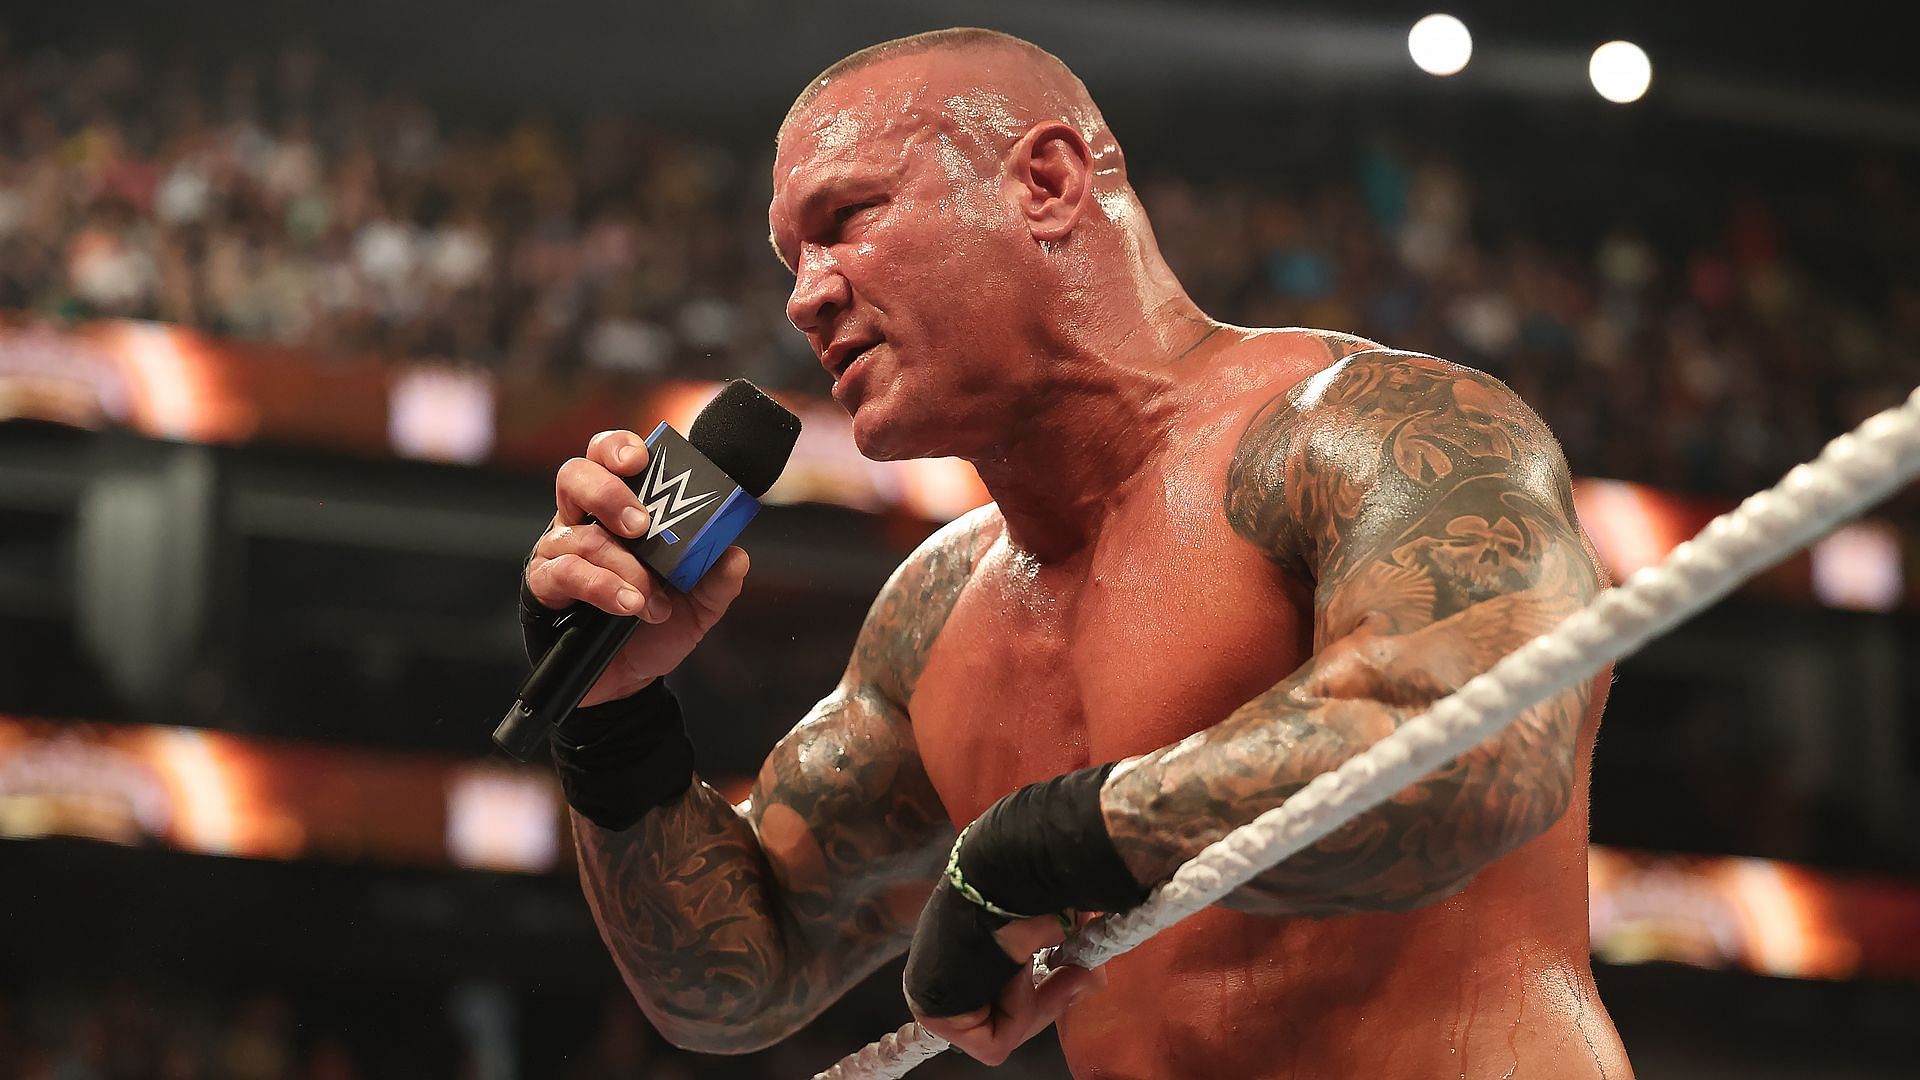 Randy Orton competed against this young star on SmackDown